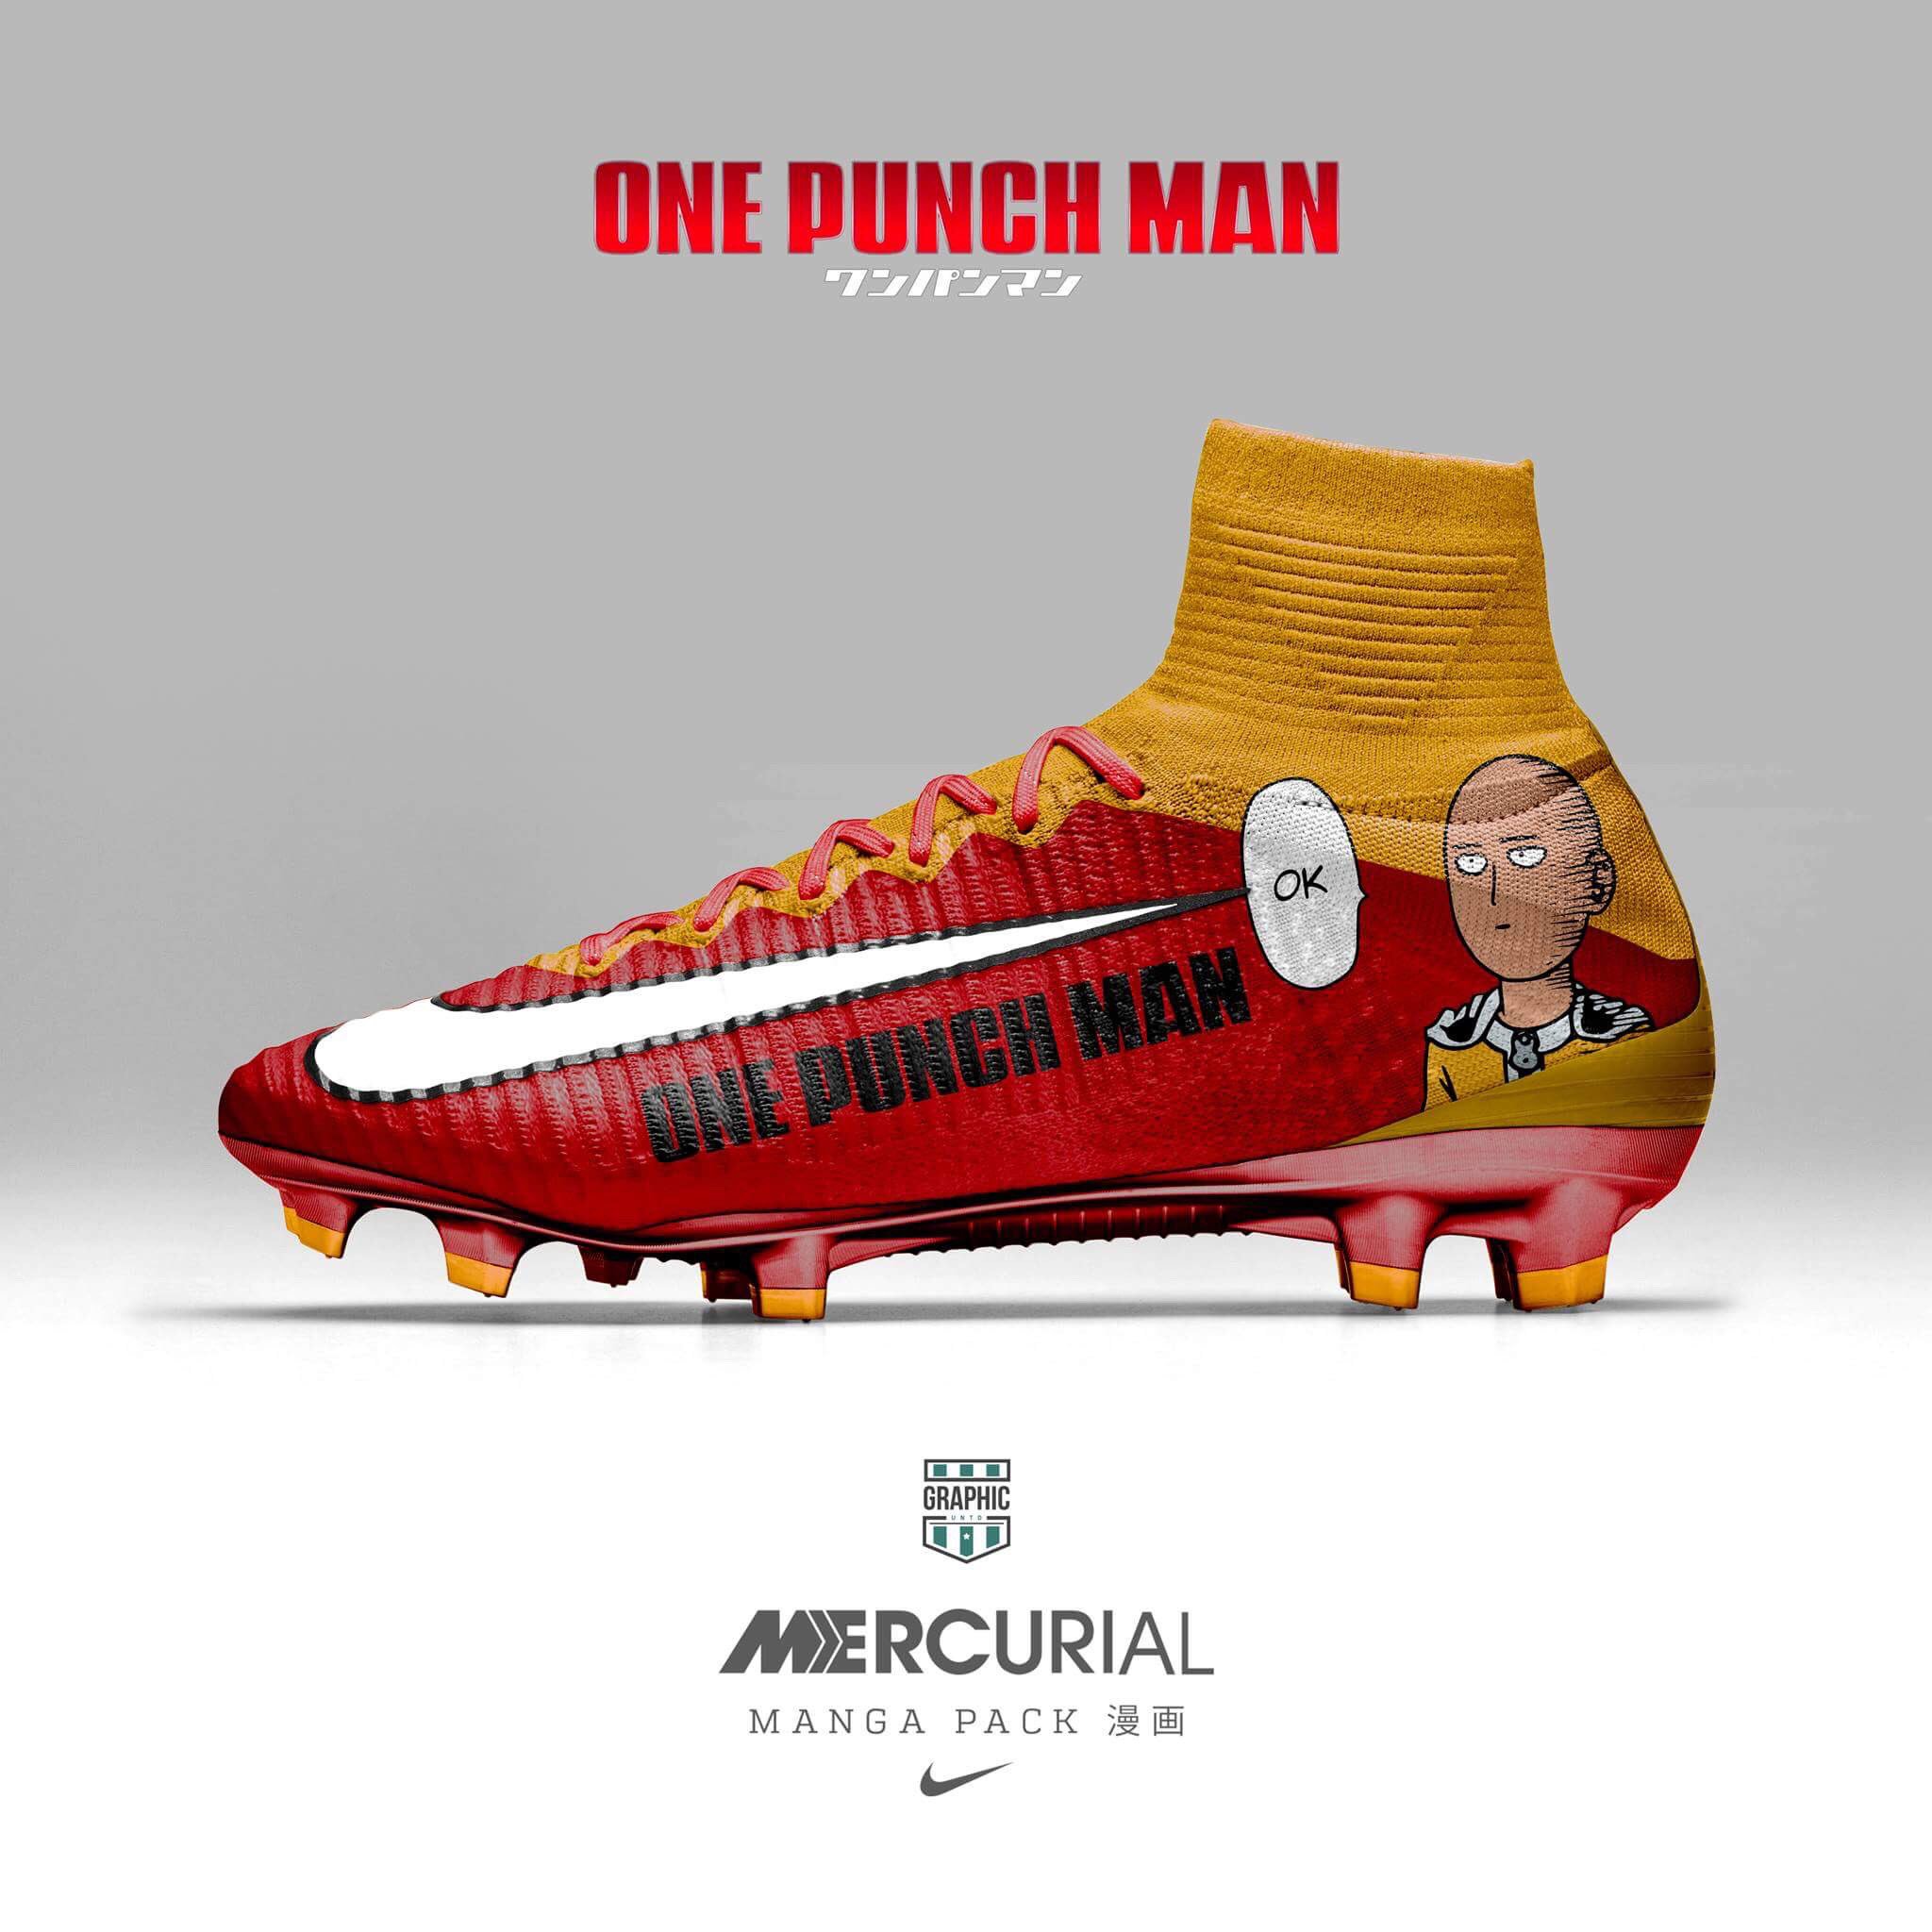 Graphic on Twitter: "#NikeMercurial Pack 🉐🇯🇵 https://t.co/SC9tbcbvU5 https://t.co/wrh5mSG5A7" / Twitter